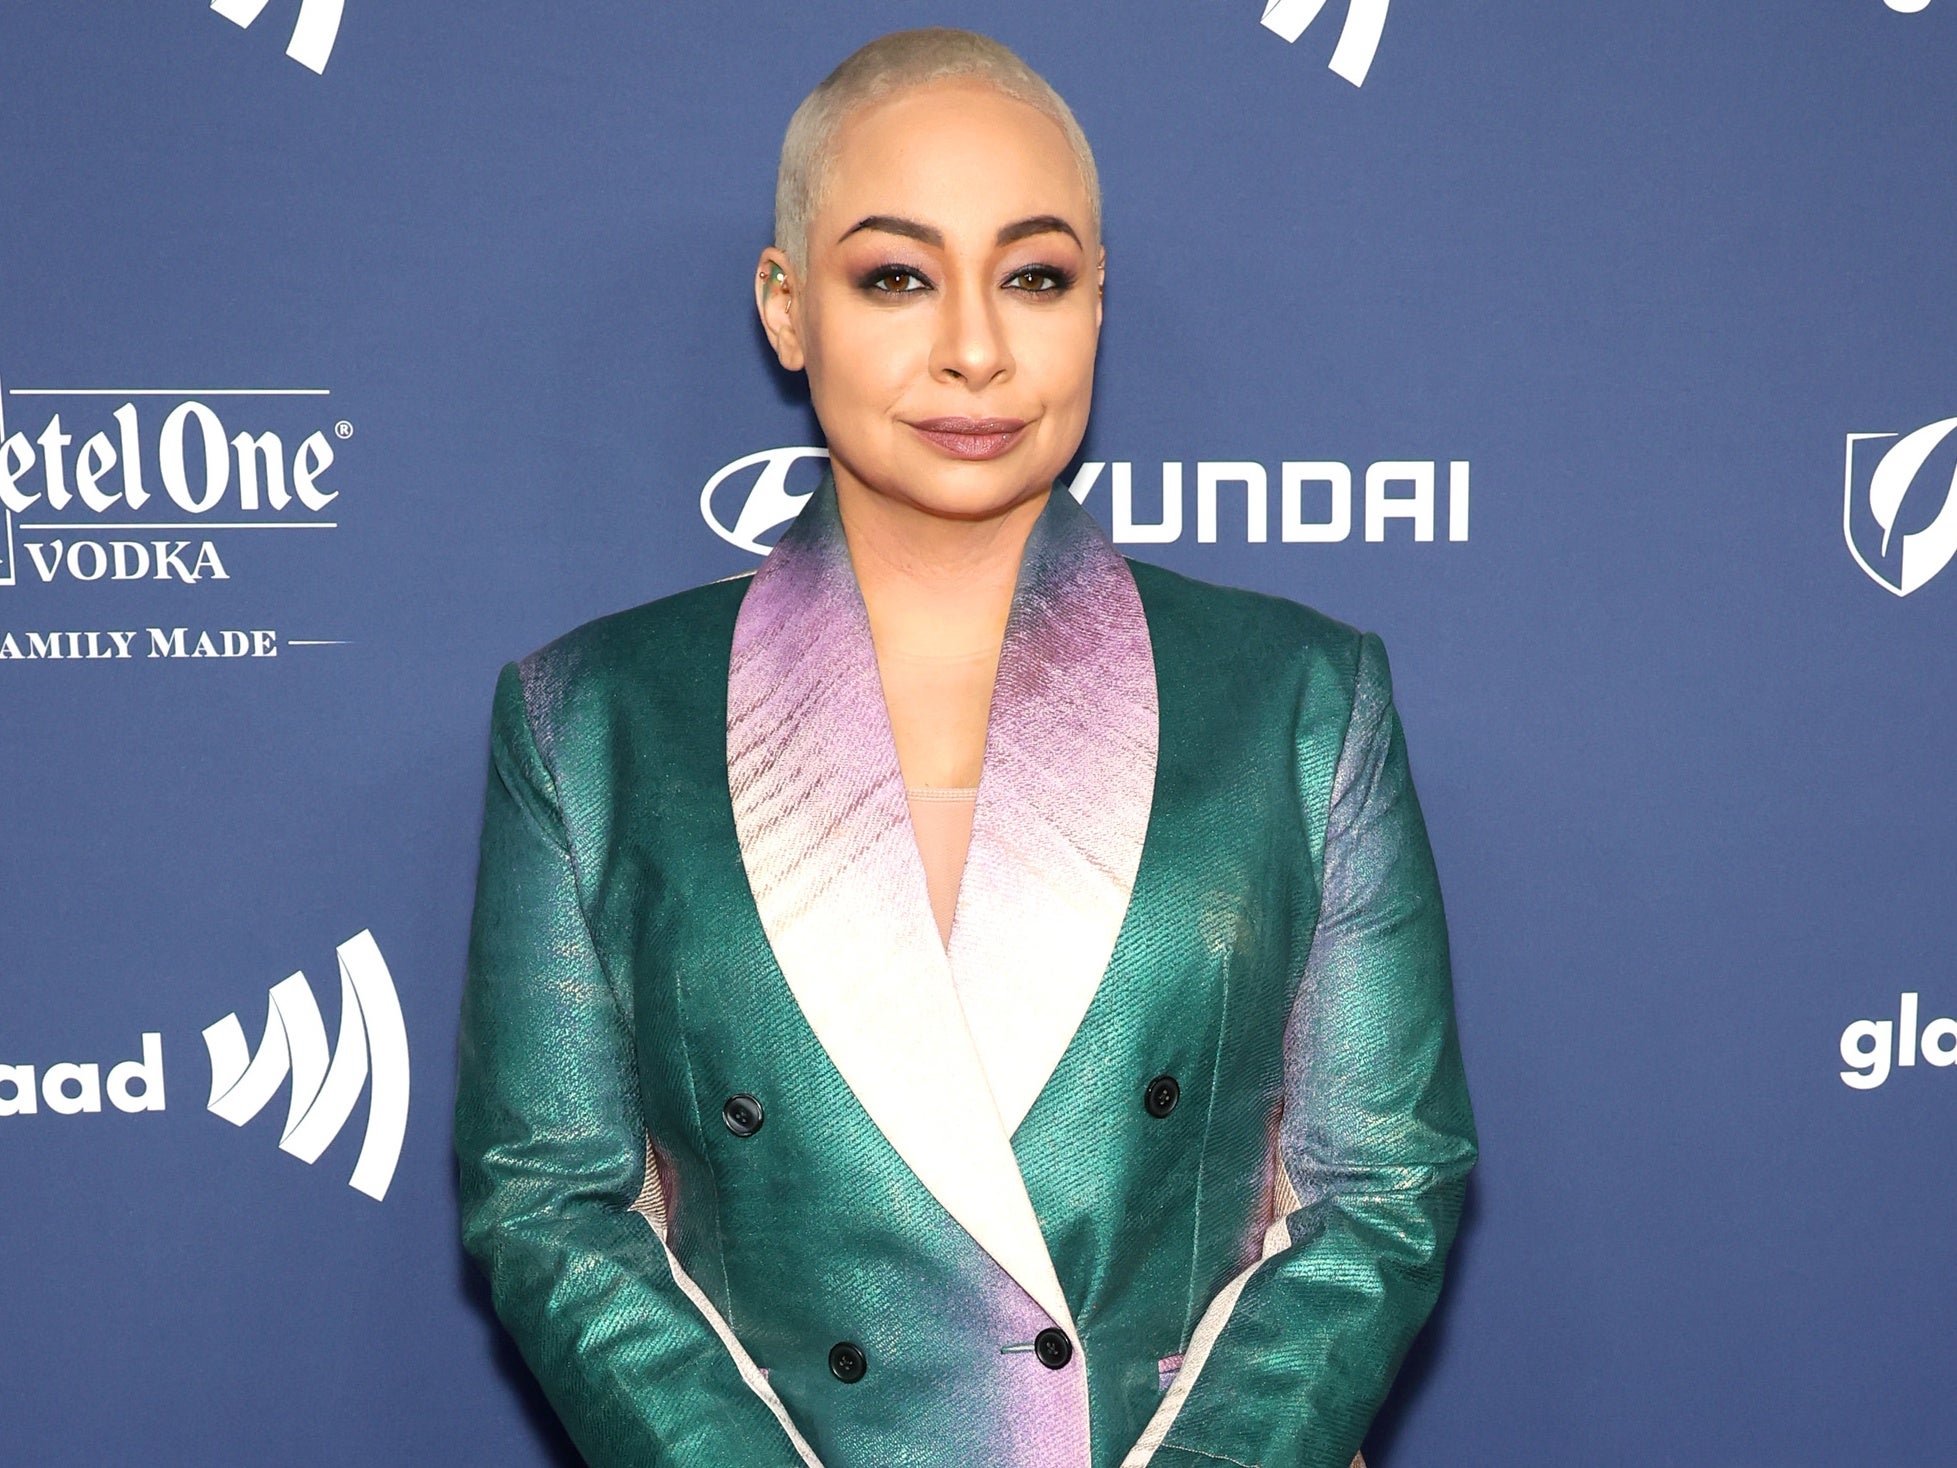 Raven-Symoné On Relationship NDAs: ‘It’s Very Impersonal, But Someone In Our Position Needs To Do That.’